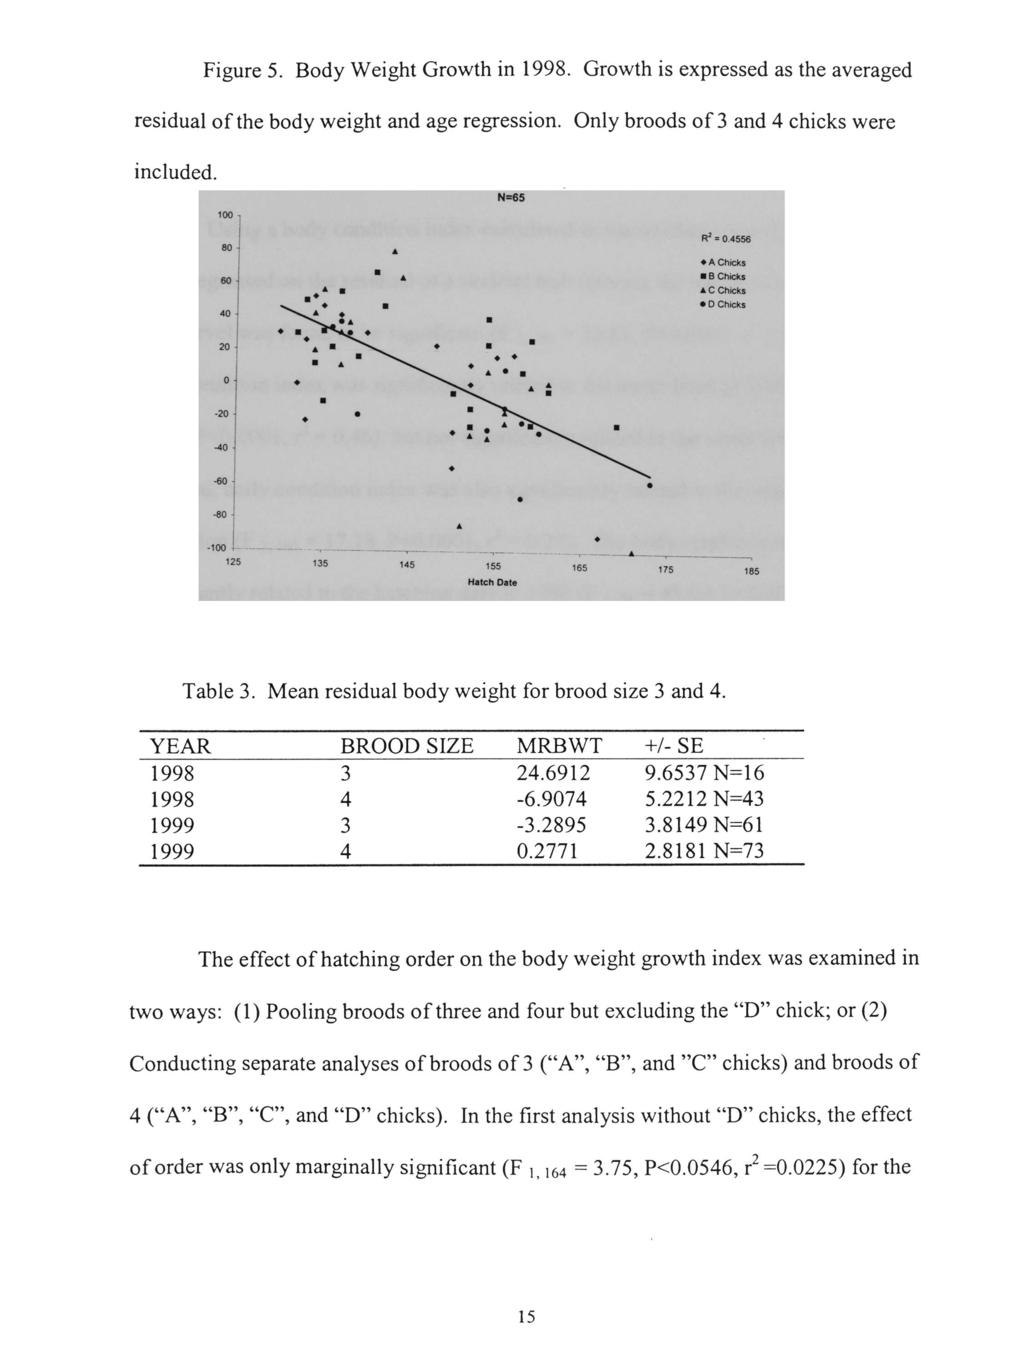 Figure 5. Body Weight Growth in 1998. Growth is expressed as the averaged residual of the body weight and age regression. Only broods of 3 and 4 chicks were included. 100 N=65 R' = 0.